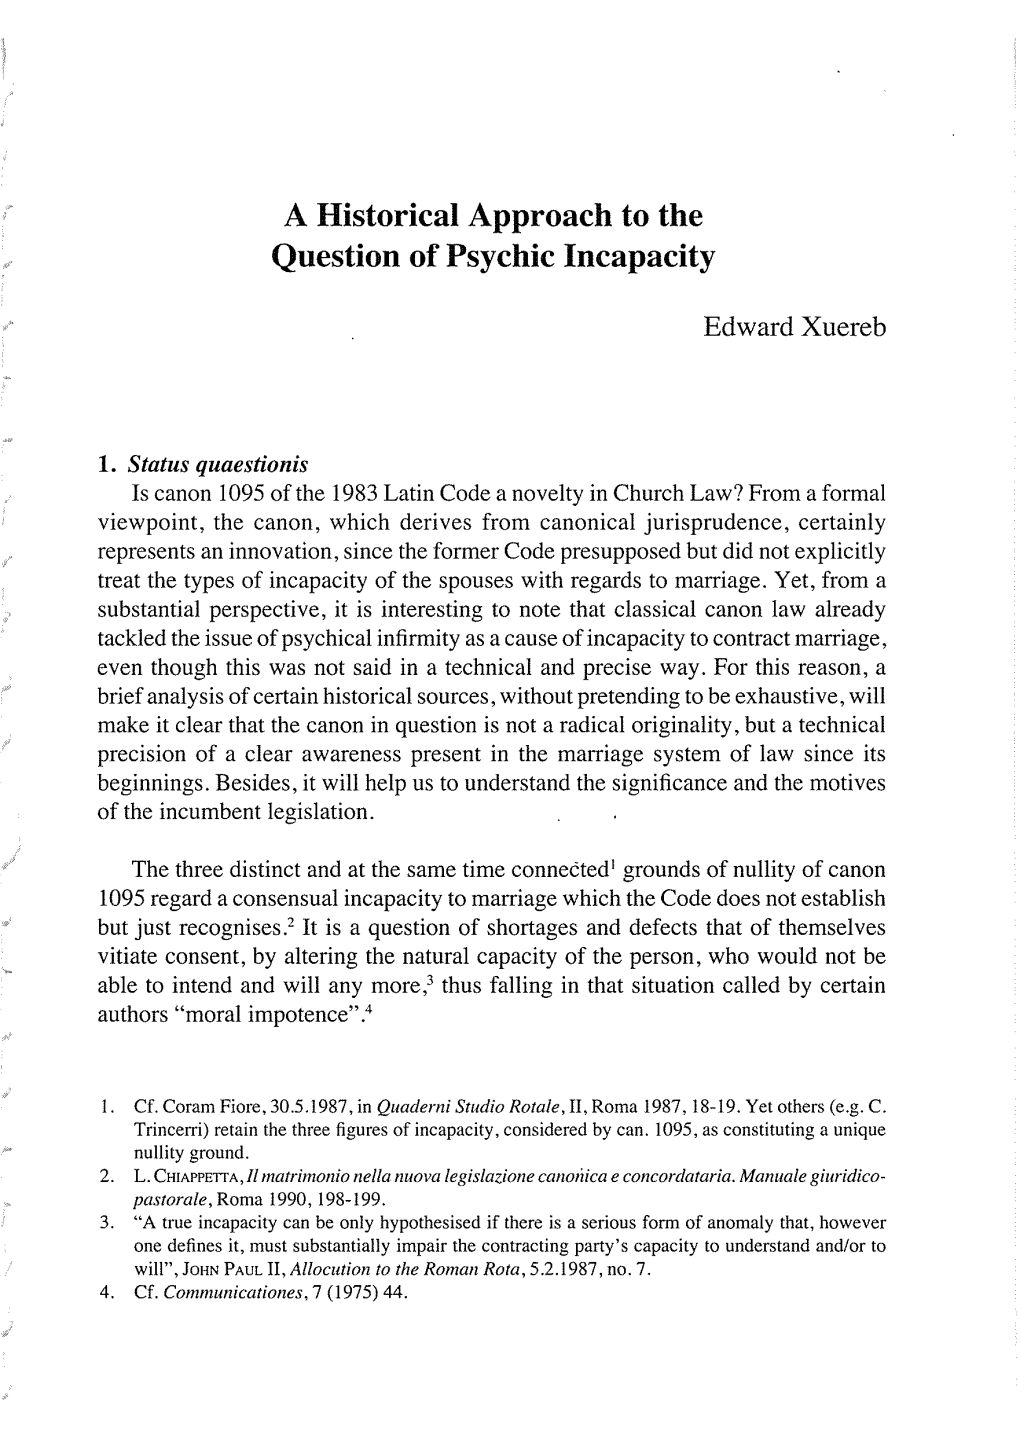 A Historical Approach to the Question of Psychic Incapacity